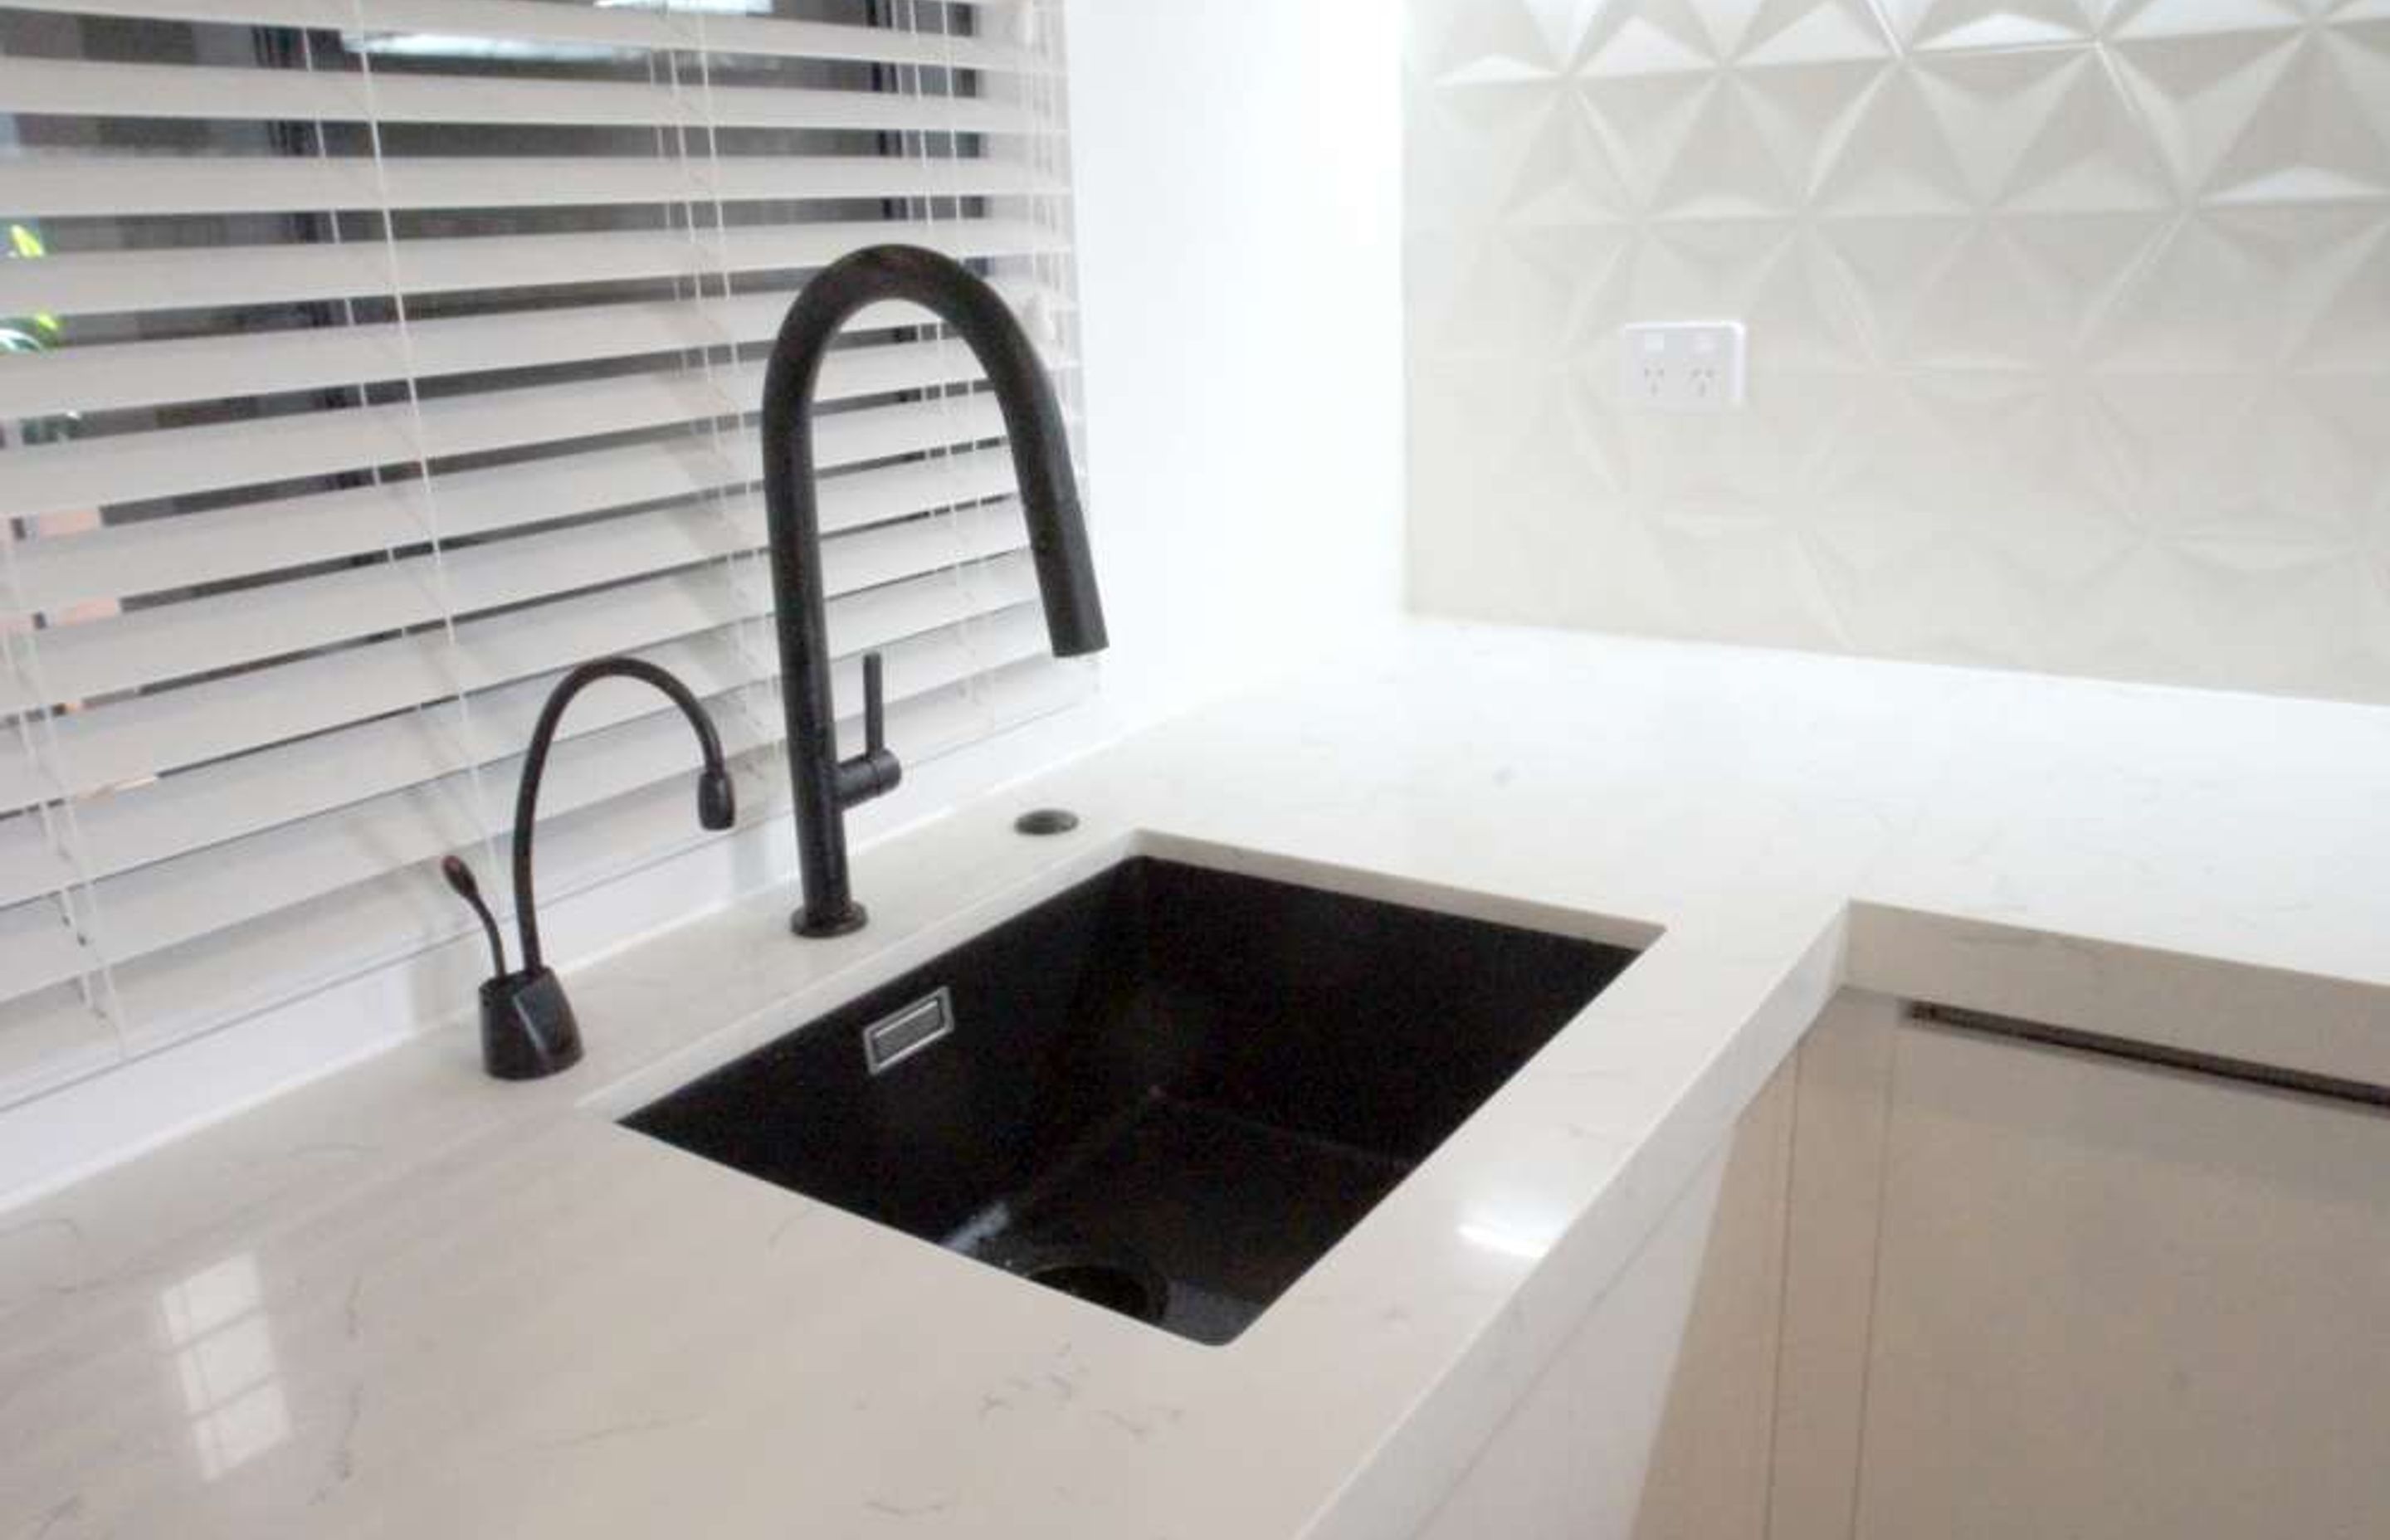 Sink installed with a hot water tap adding to convenience while being environmentally sustainable 